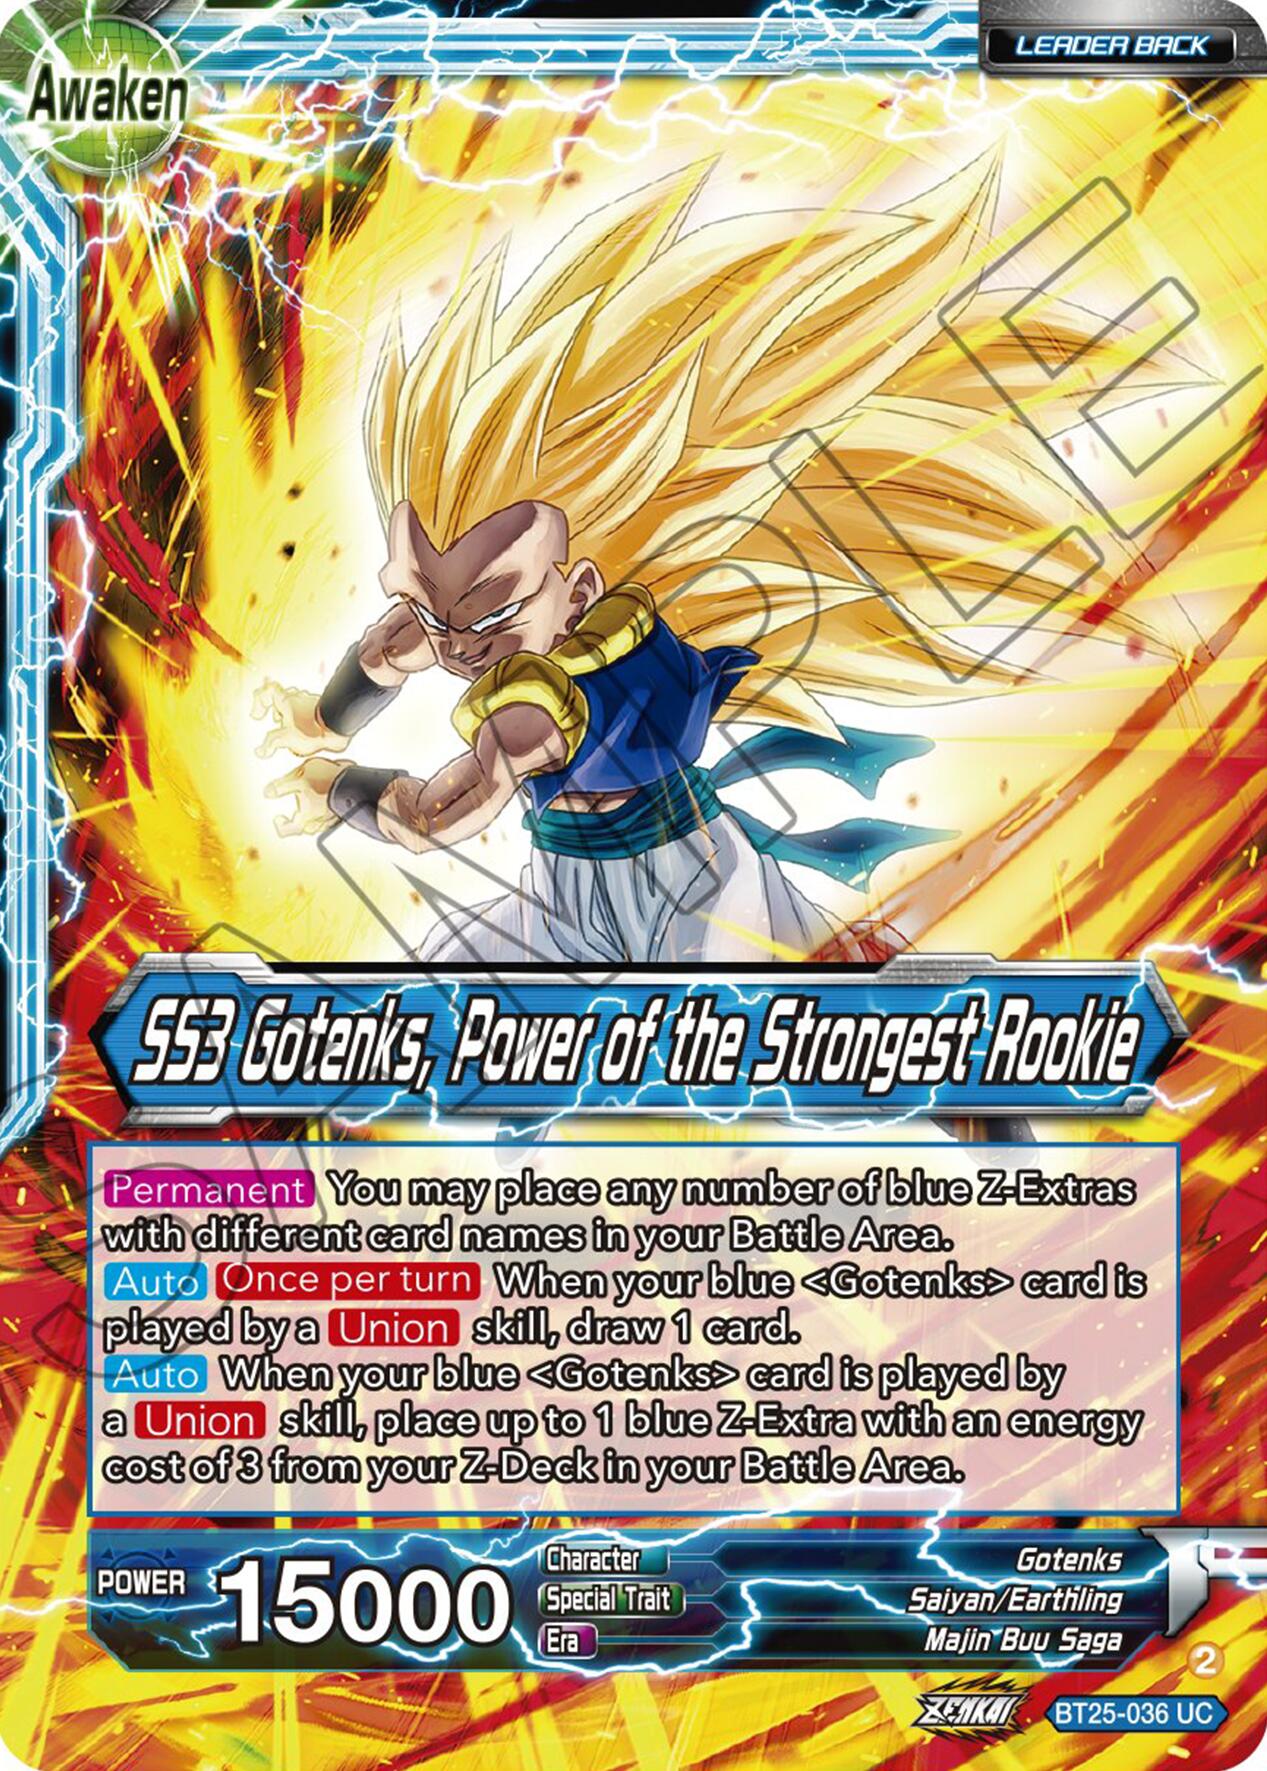 Gotenks // SS3 Gotenks, Power of the Strongest Rookie (BT25-036) [Legend of the Dragon Balls] | Sanctuary Gaming